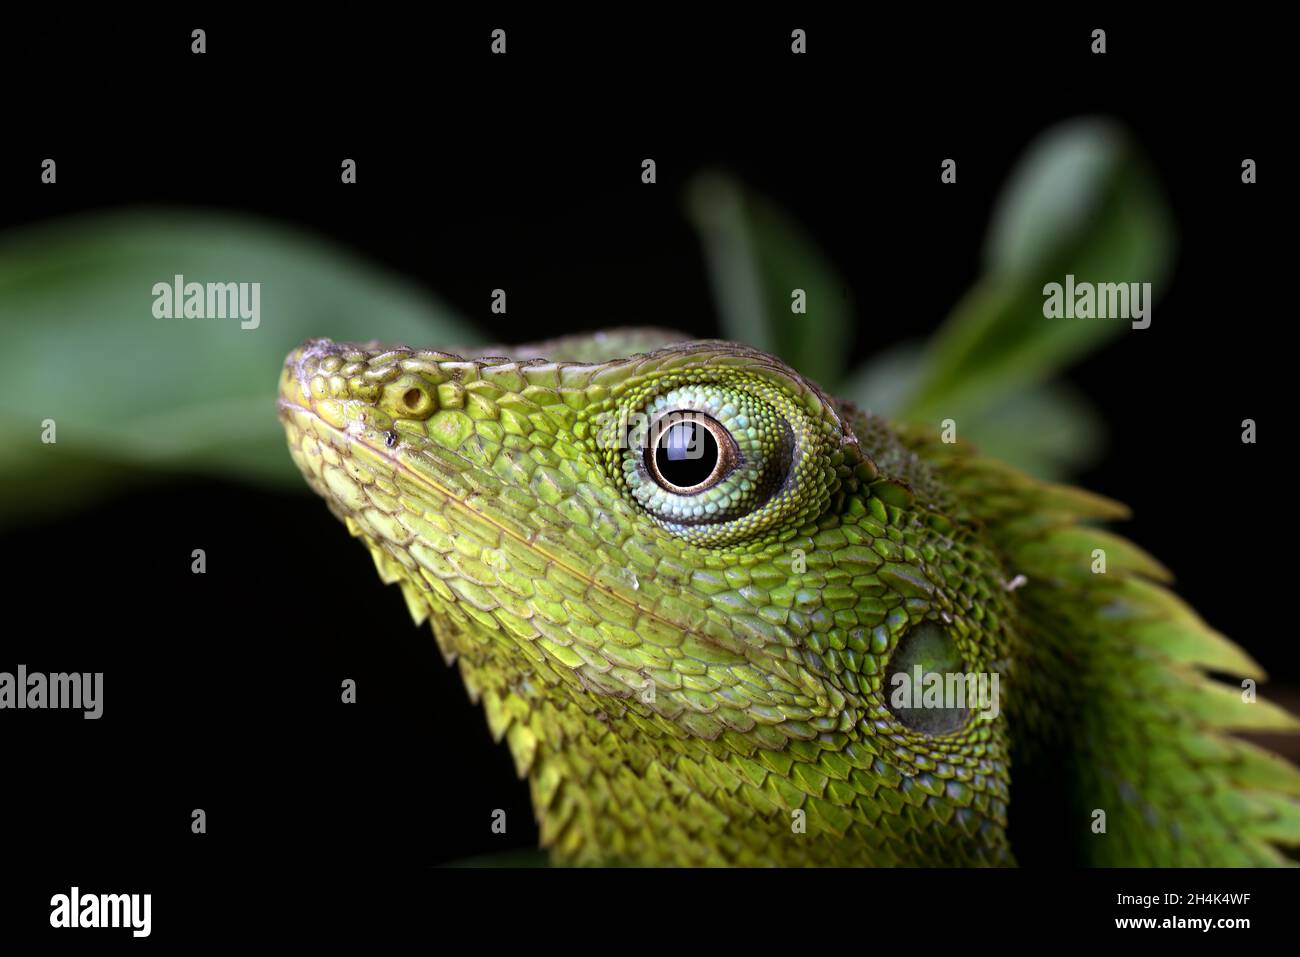 Close up photo of a maned forest lizard in black background Stock Photo